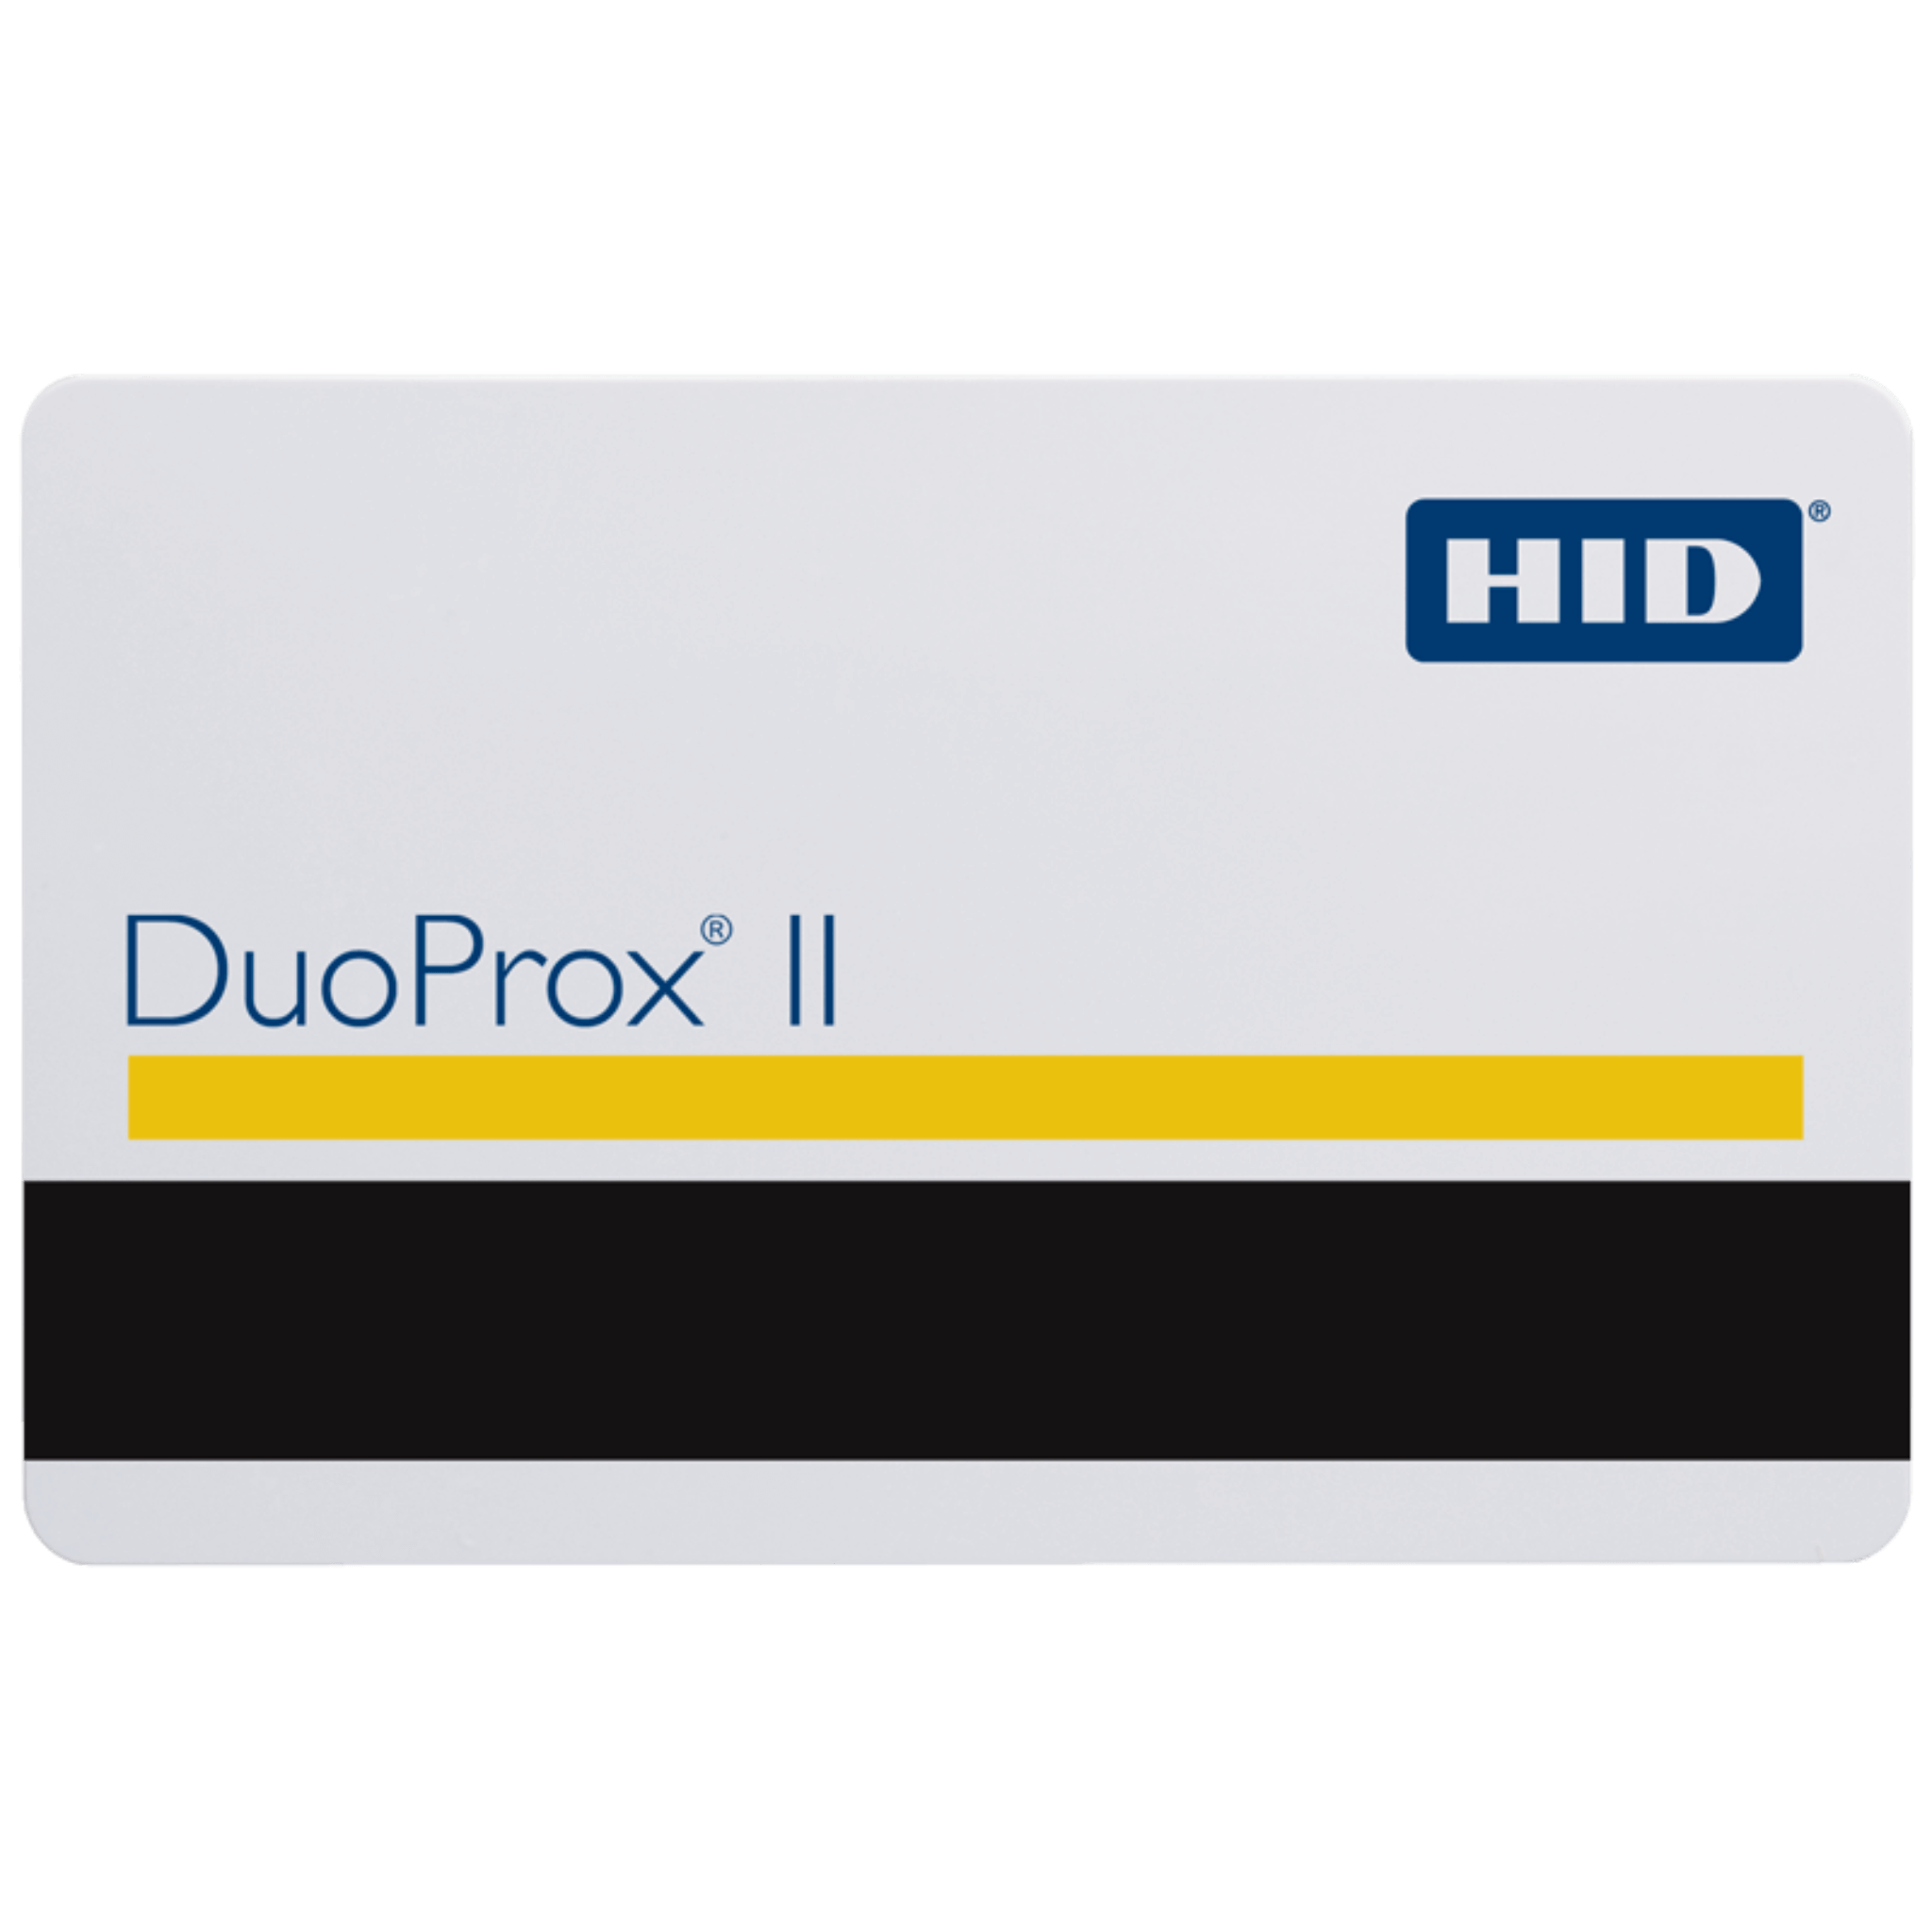 HID 1336 DuoProx II® Proximity Cards With Magnetic Stripe, 100 Pack